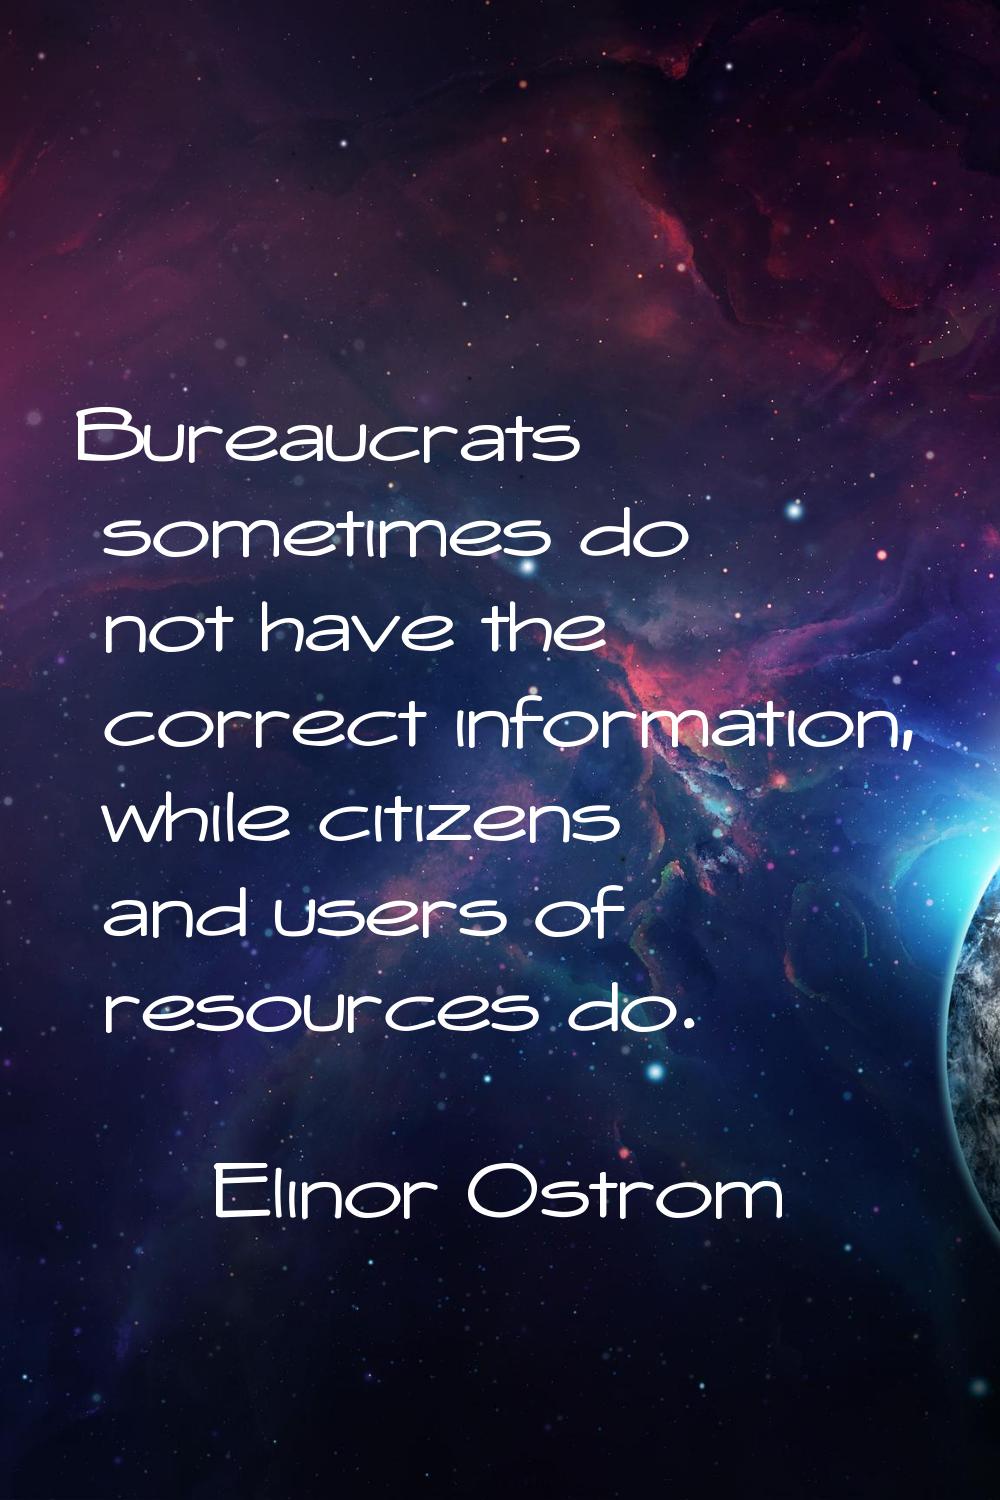 Bureaucrats sometimes do not have the correct information, while citizens and users of resources do